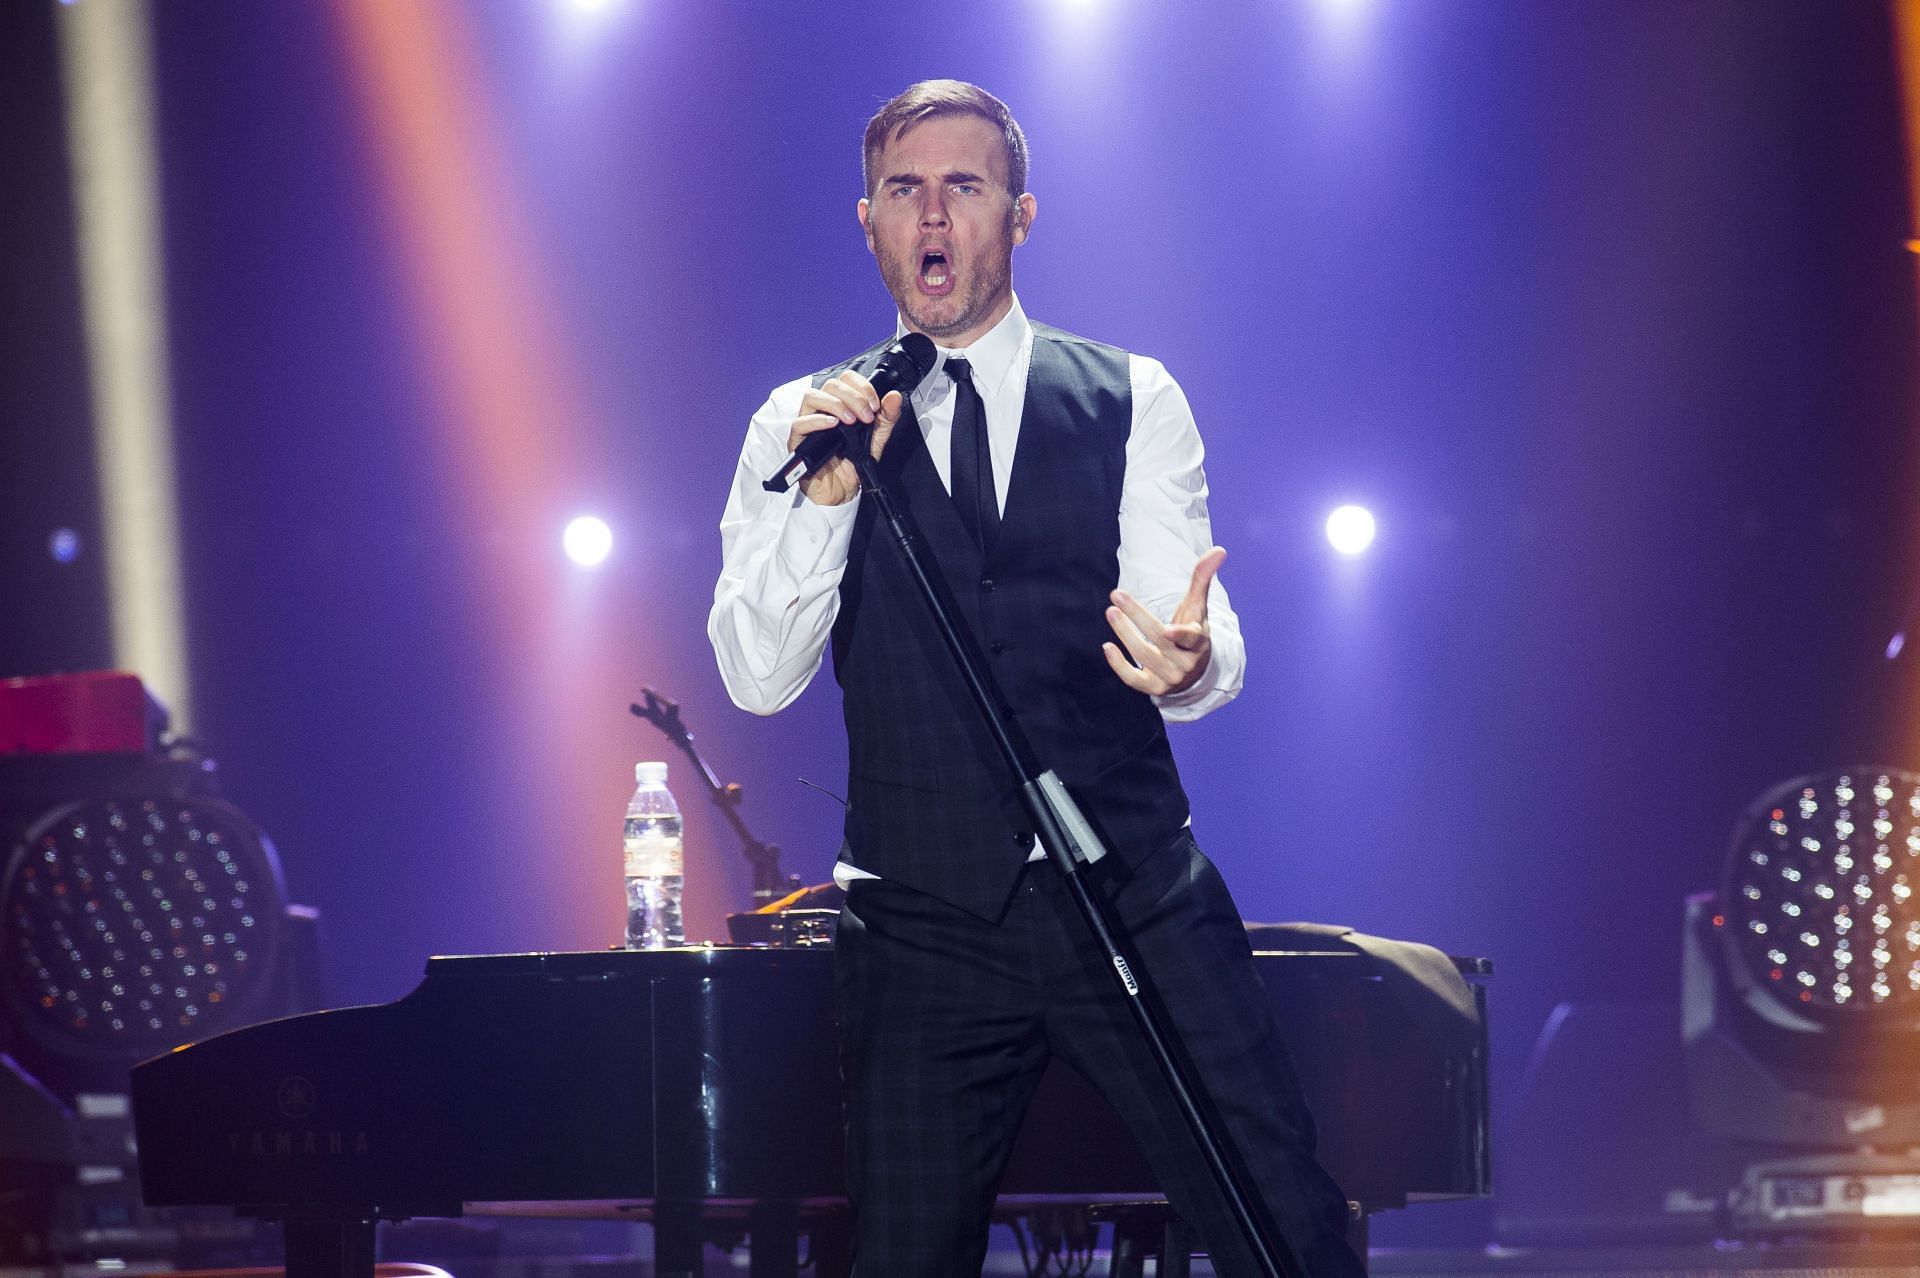 Gary Barlow Performs At The Odyssey Arena, Belfast